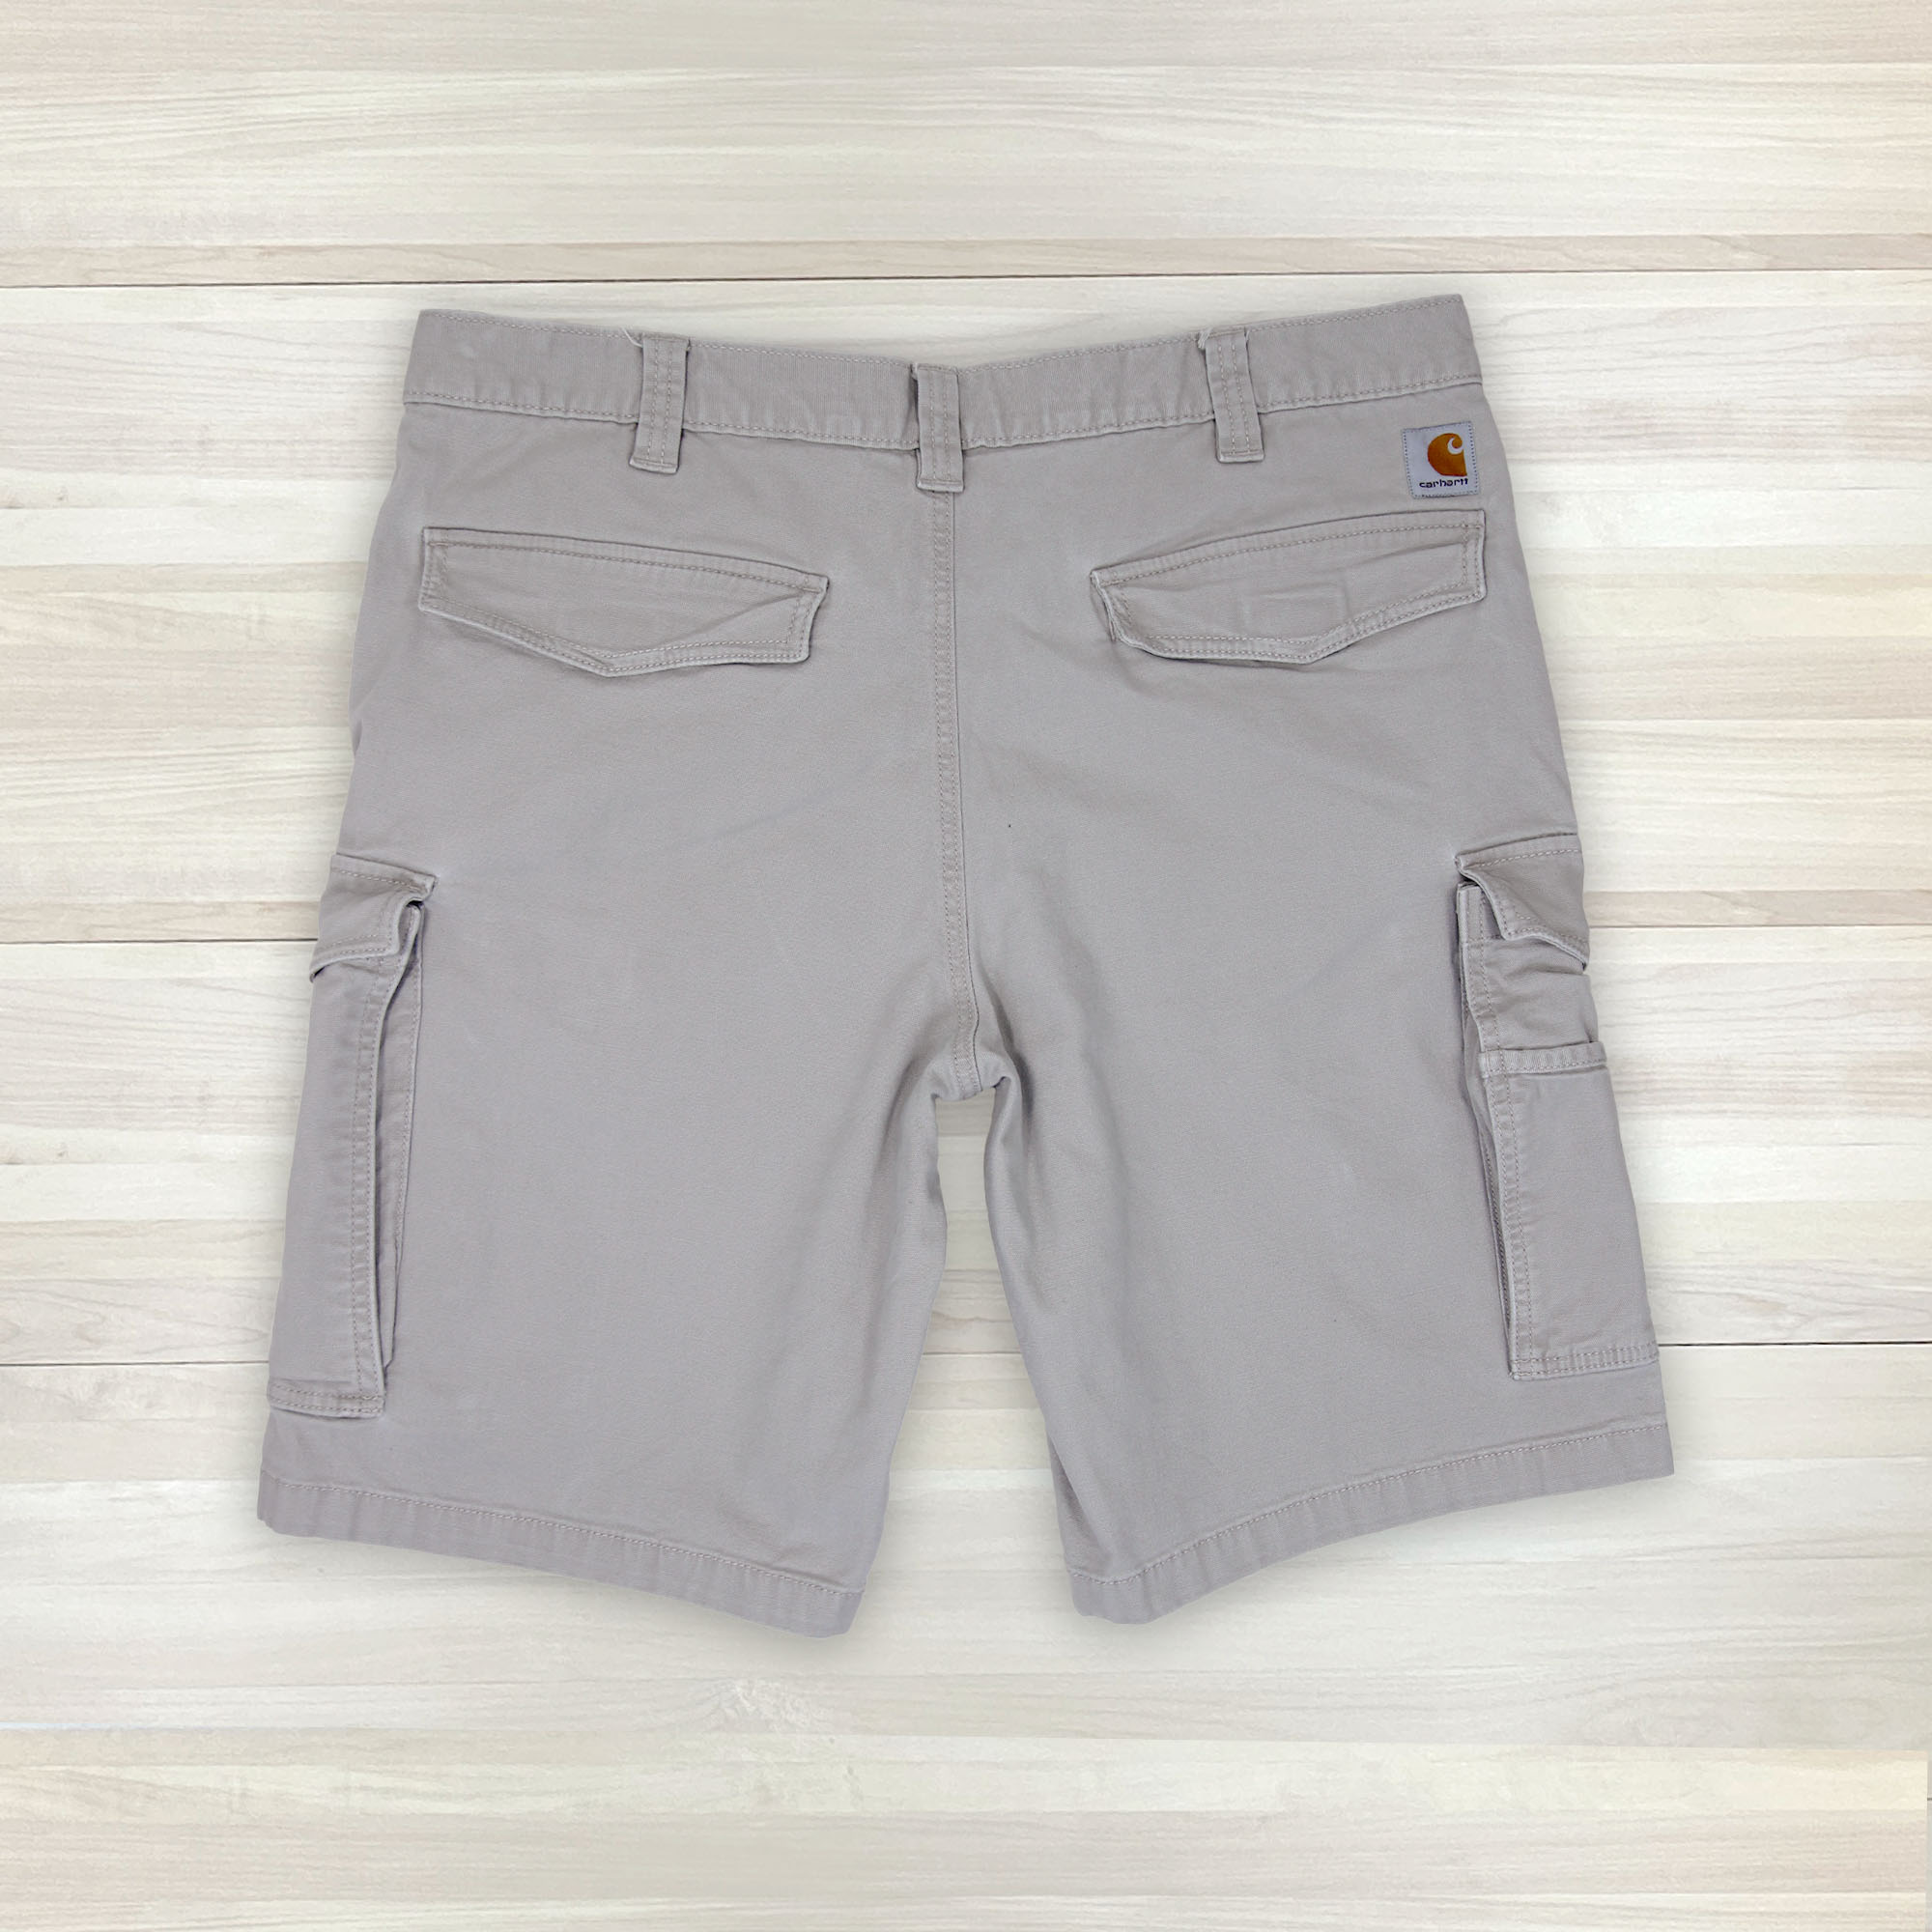 Men's Carhartt Relaxed Fit Canvas Shorts - Size 38-2